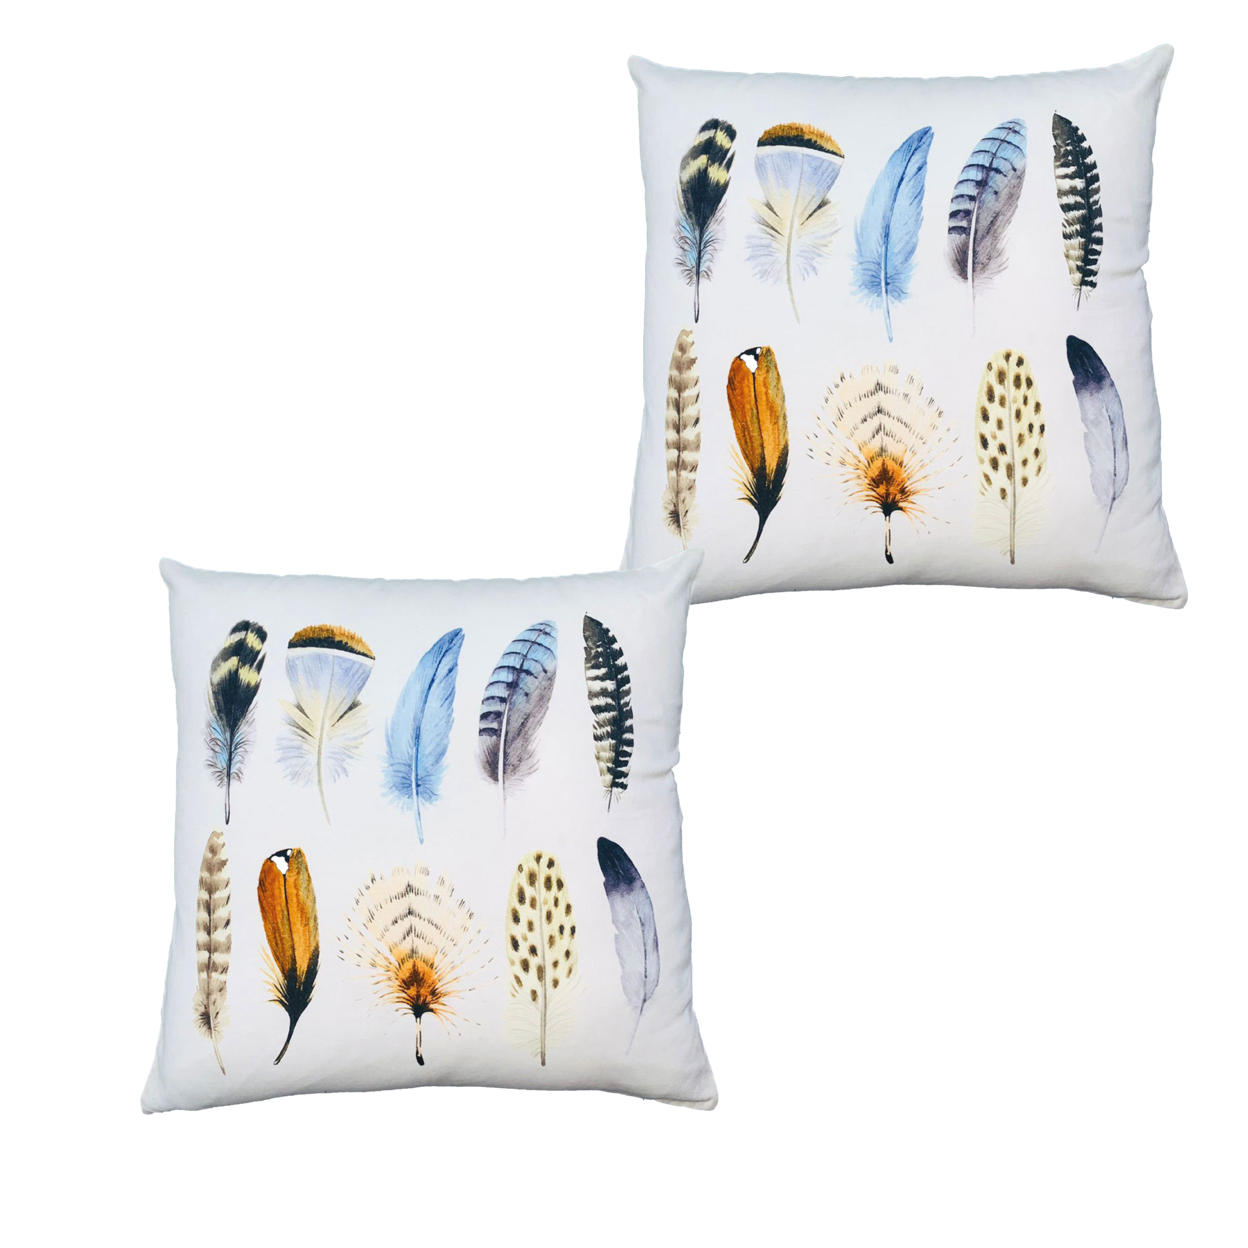 20 X 20 Square Cotton Accent Throw Pillows, Printed Feather Design, Set Of 2, White, Multicolor